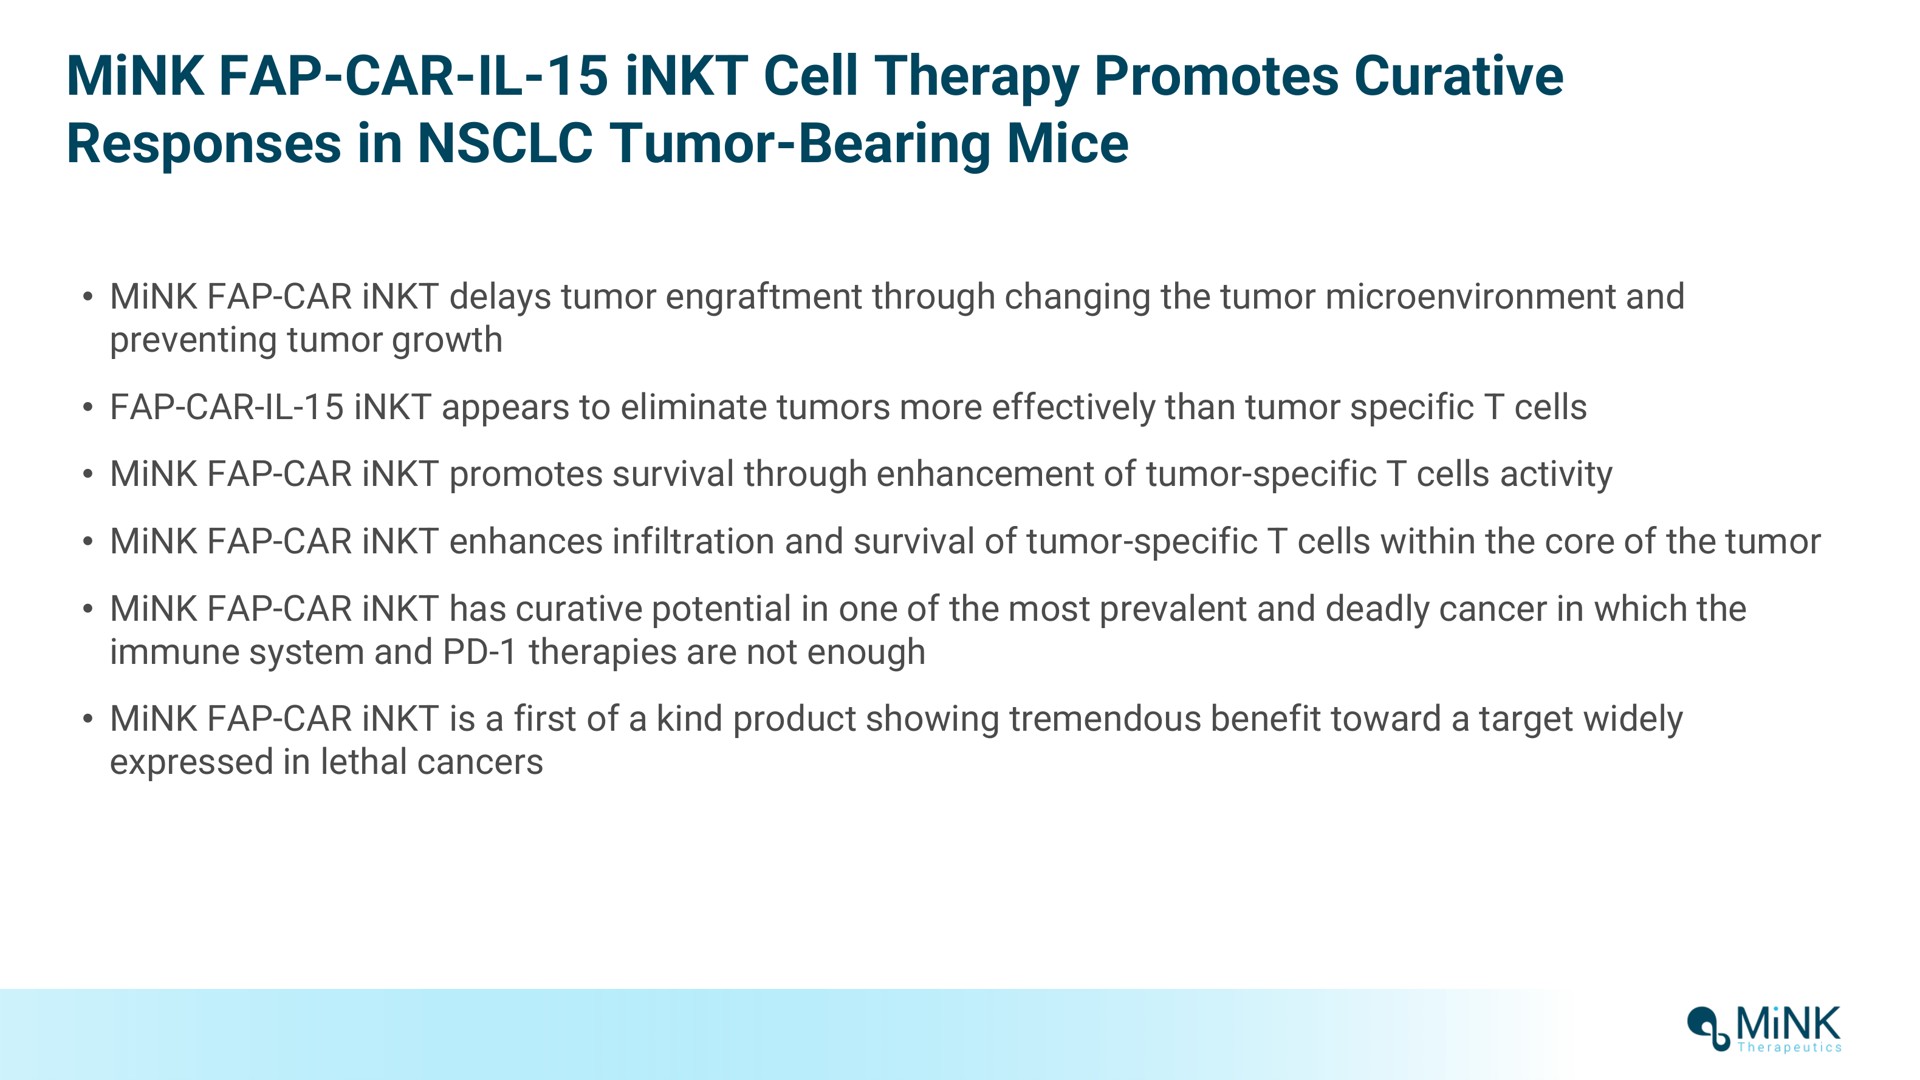 mink car cell therapy promotes curative responses in tumor bearing mice | Mink Therapeutics